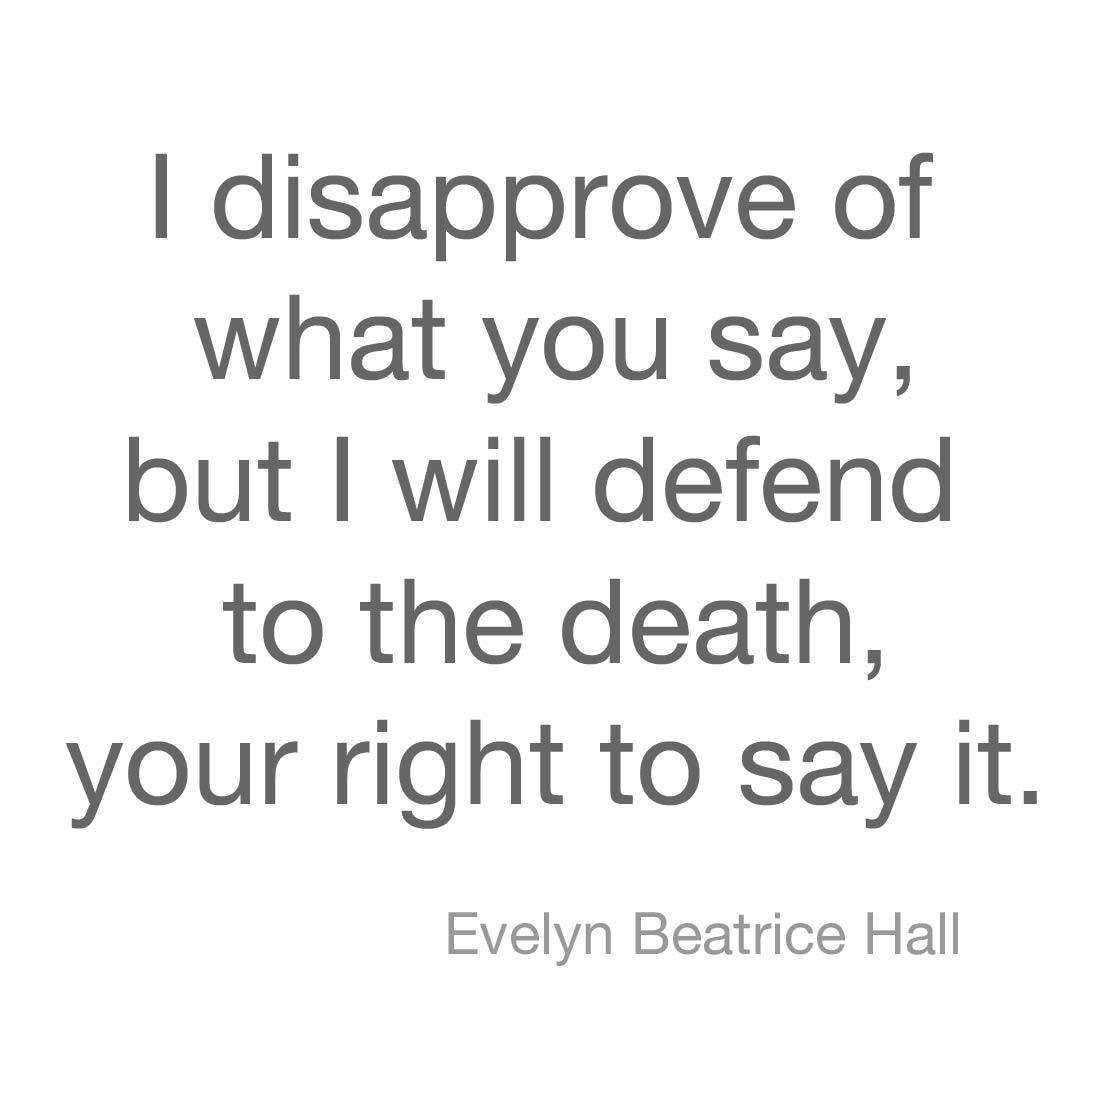 Quote by Evelyn Beatrice Hall (attributed to Voltaire)